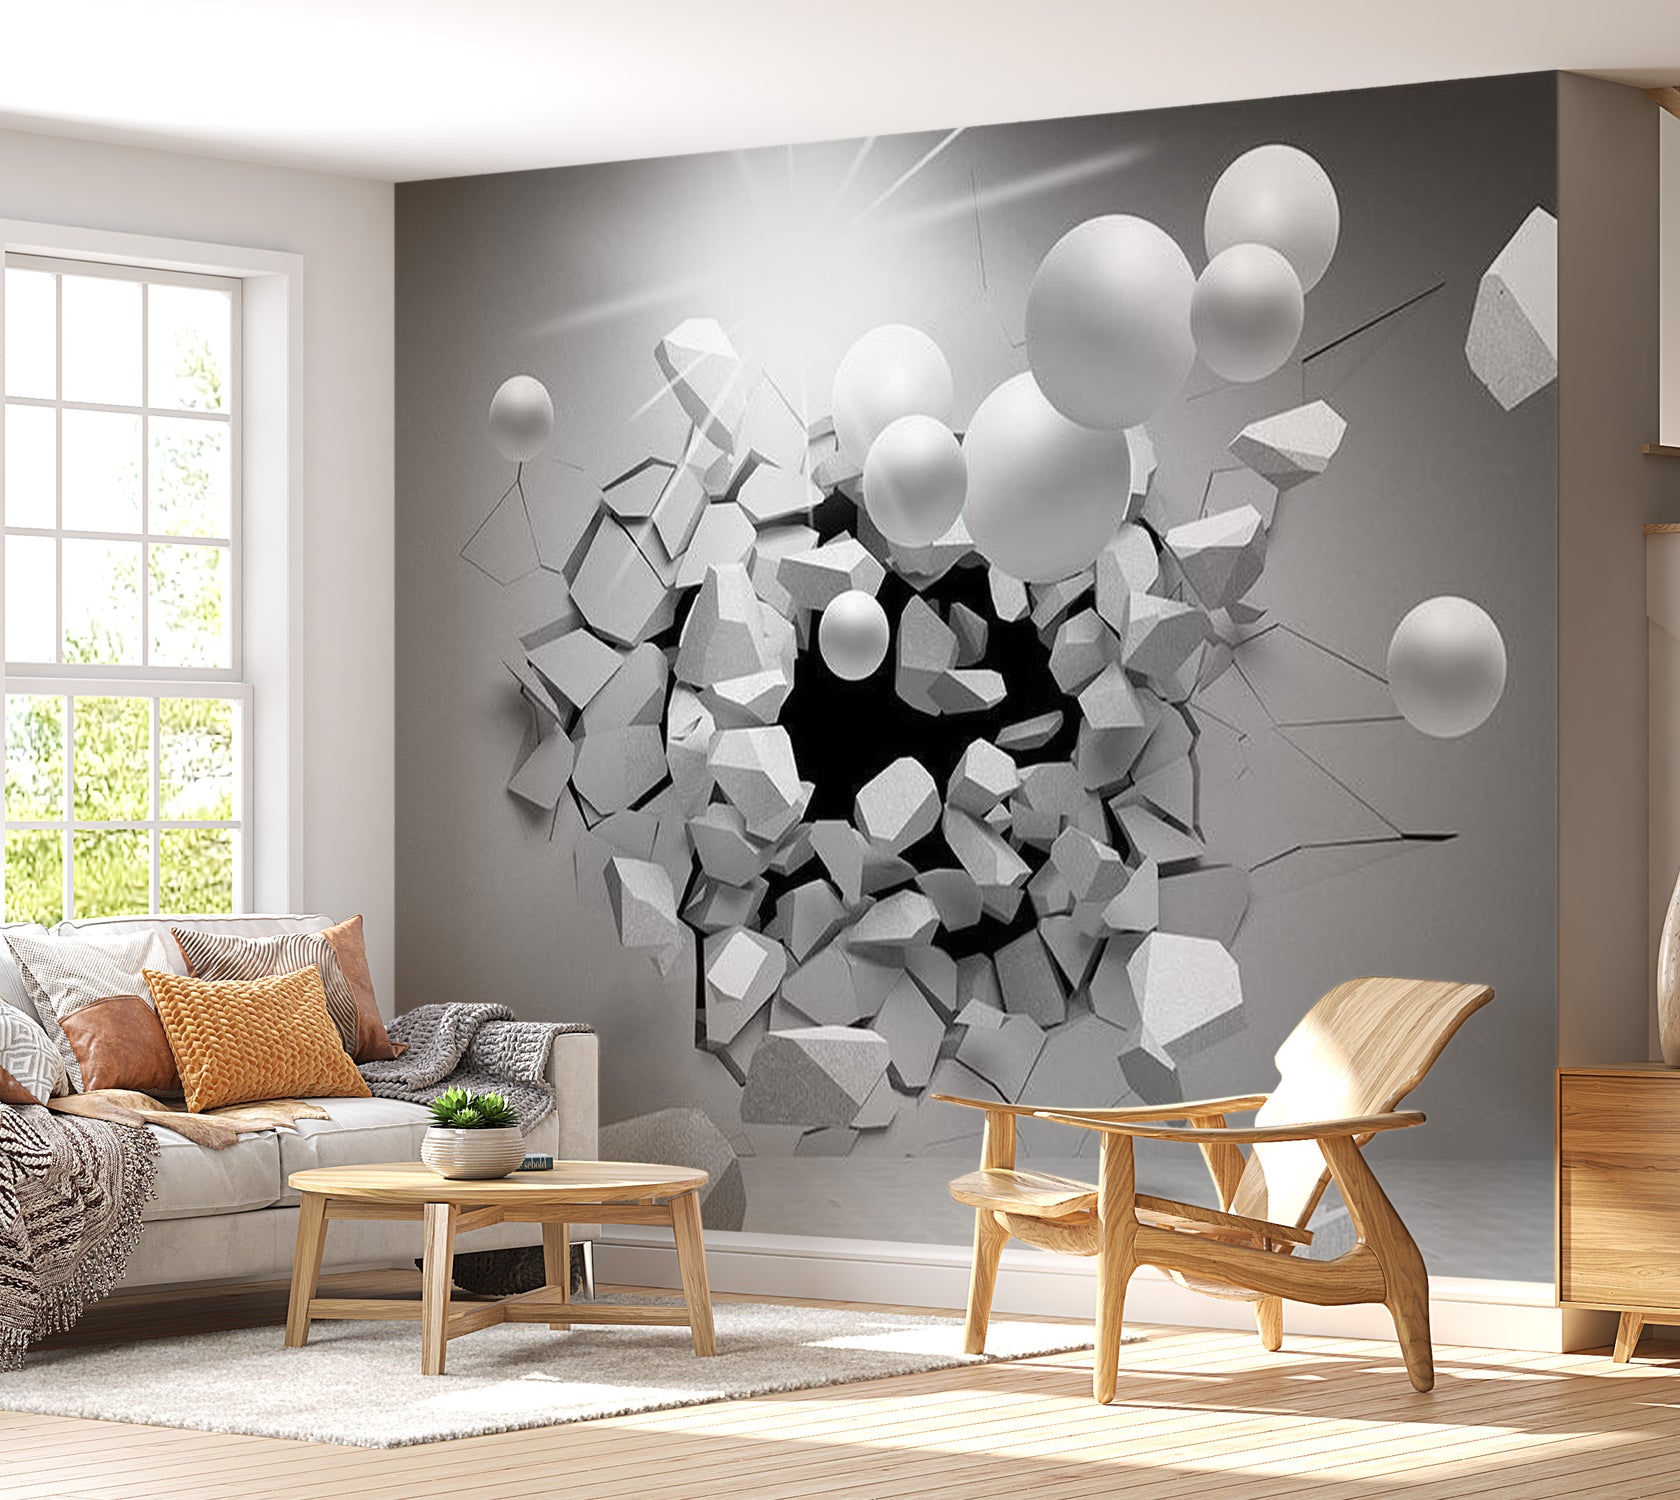 Peel & Stick 3D Illusion Wall Mural - Shout Of Freedom - Removable Wall Decals